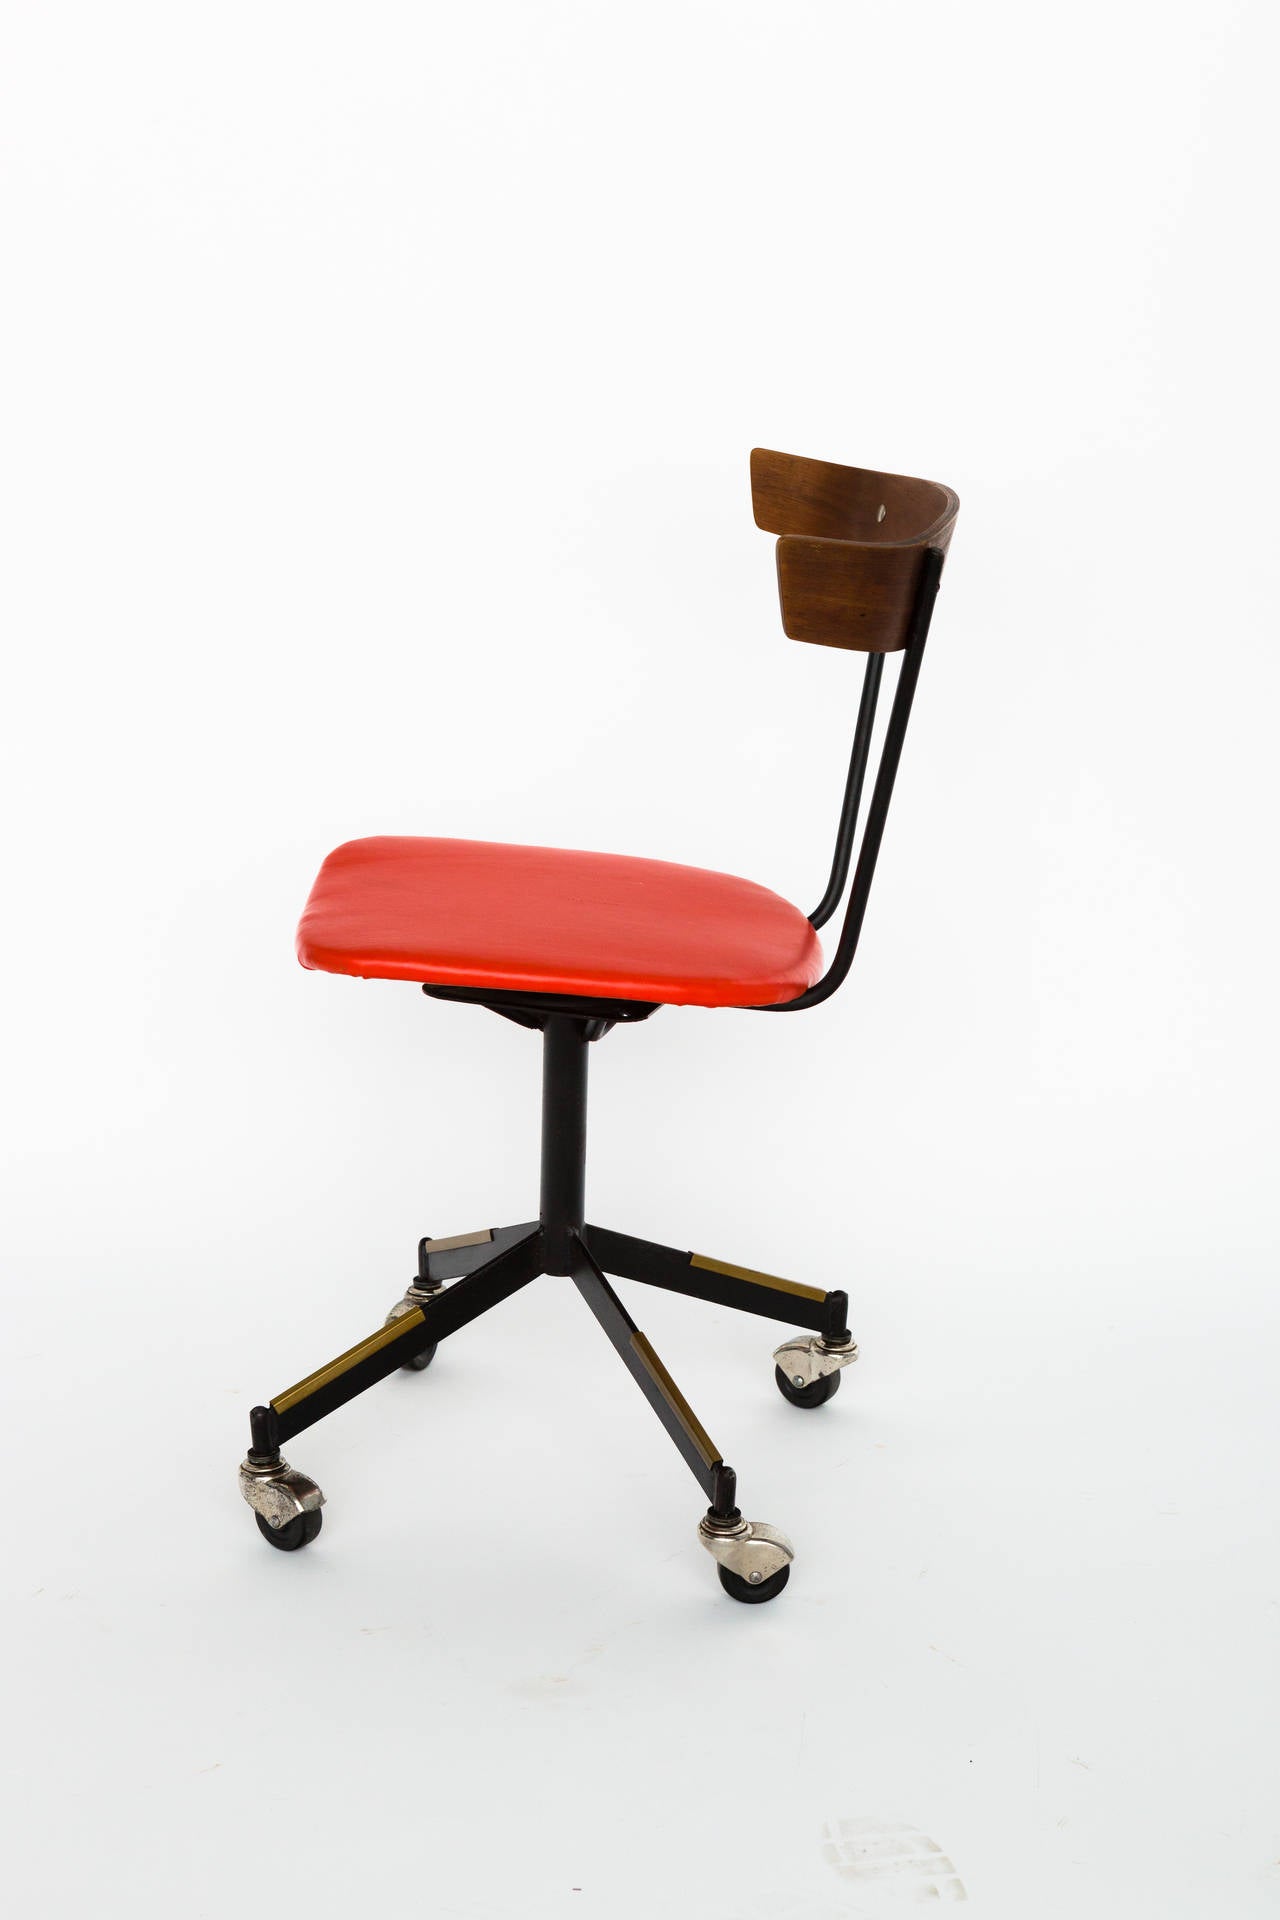 American Mid Century Modern Desk Chair By Clifford Pascoe